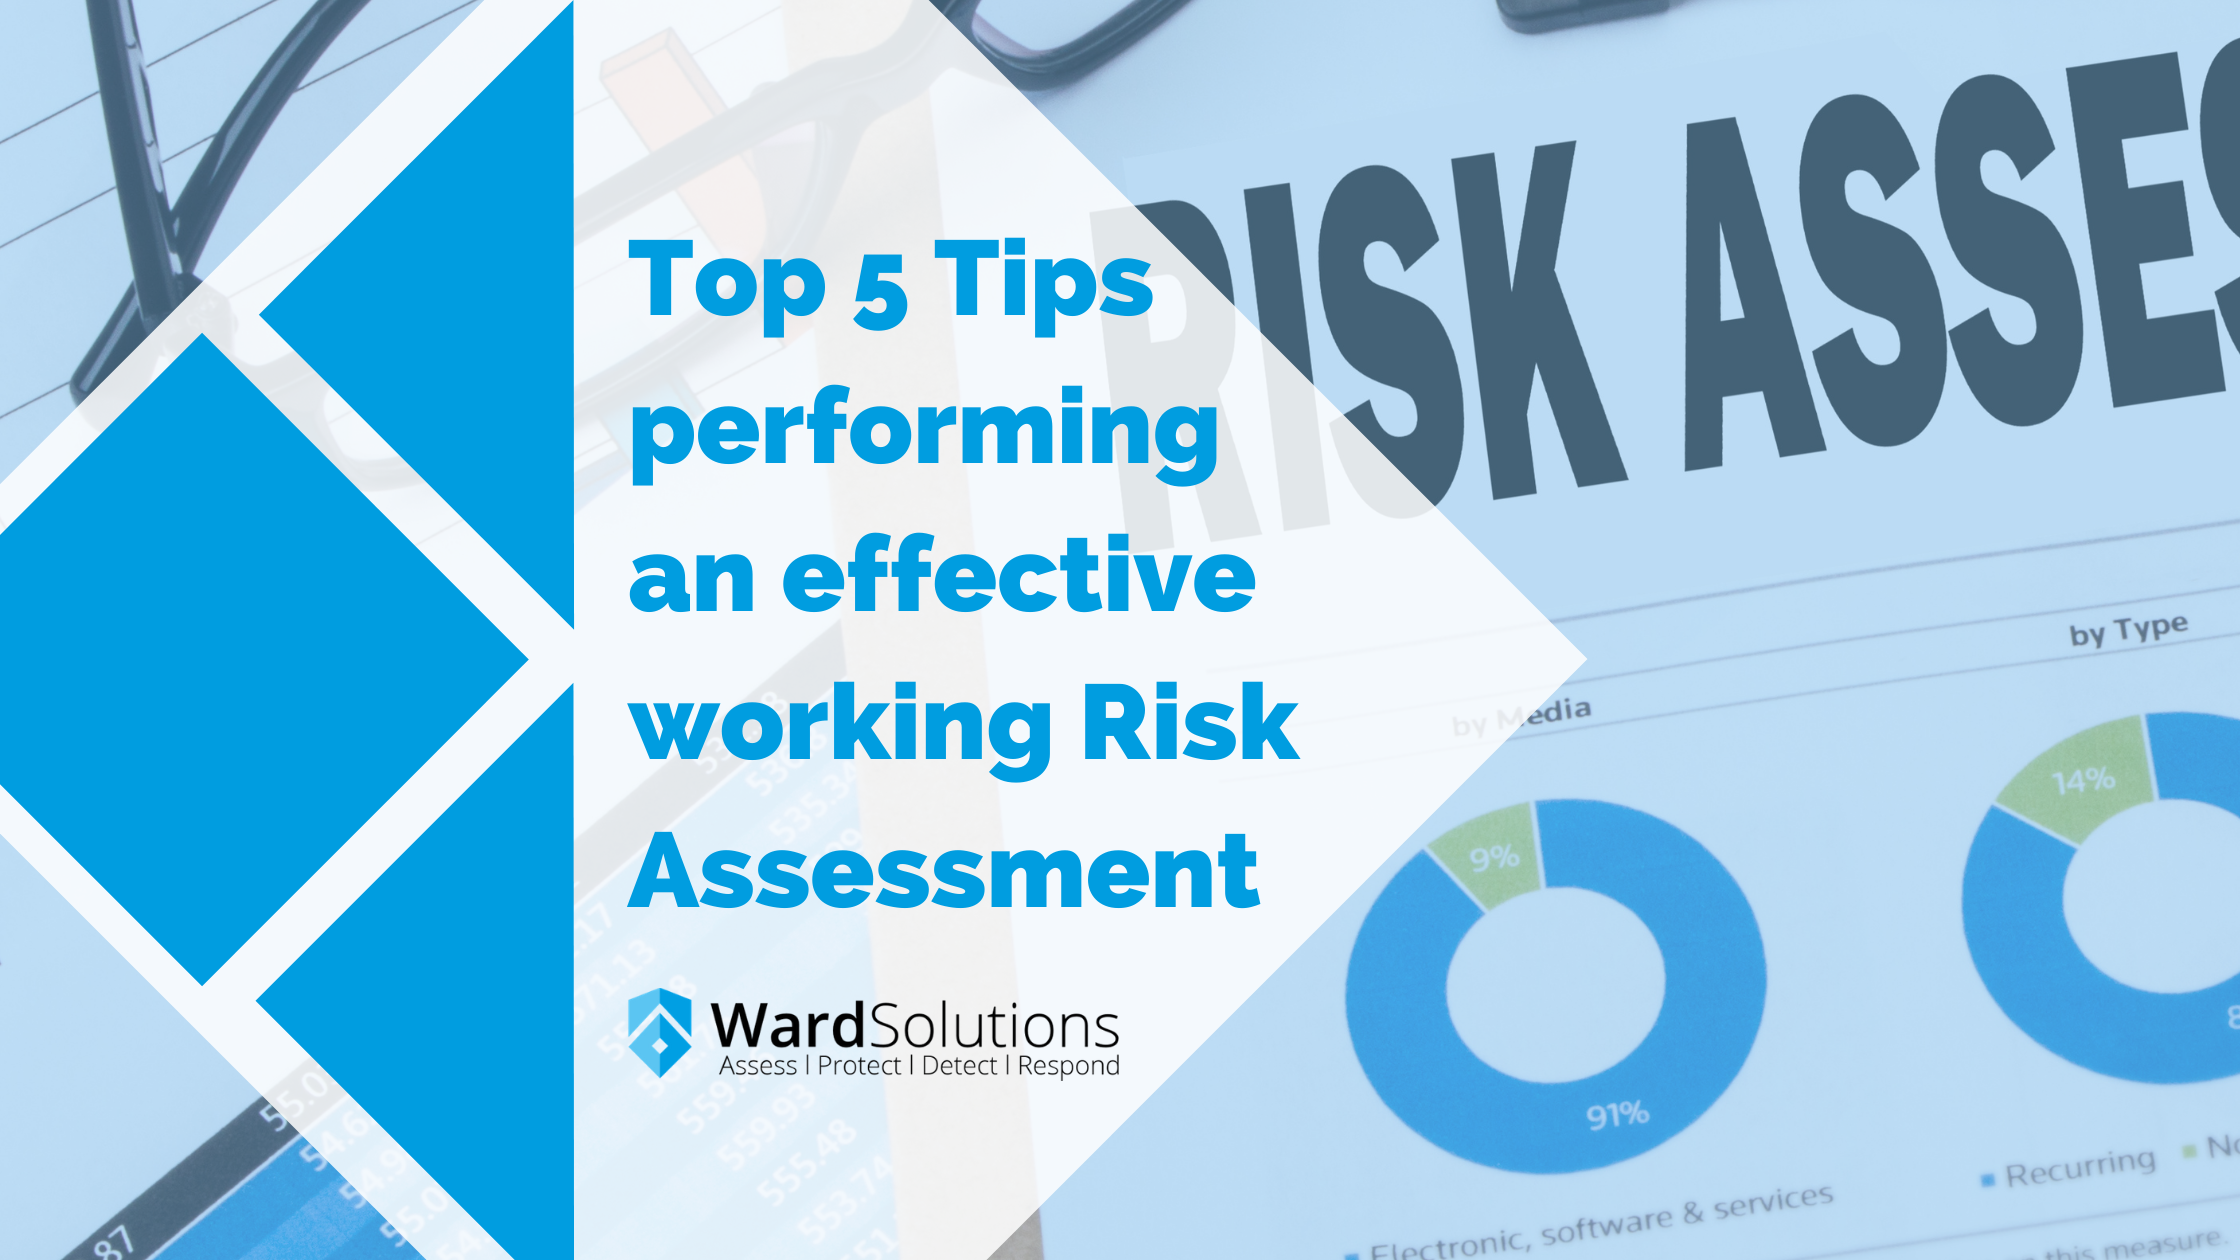 Top 5 Tips performing an effective working Risk Assessment